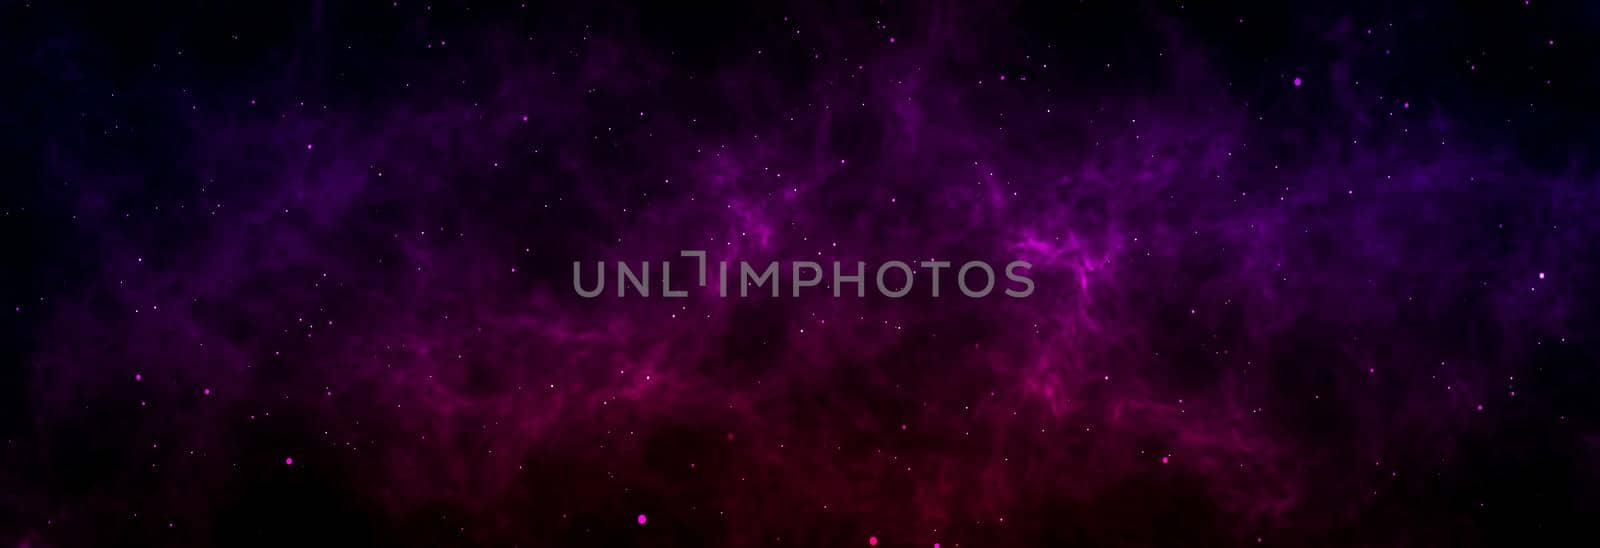 deep space with stars panoramic scene background